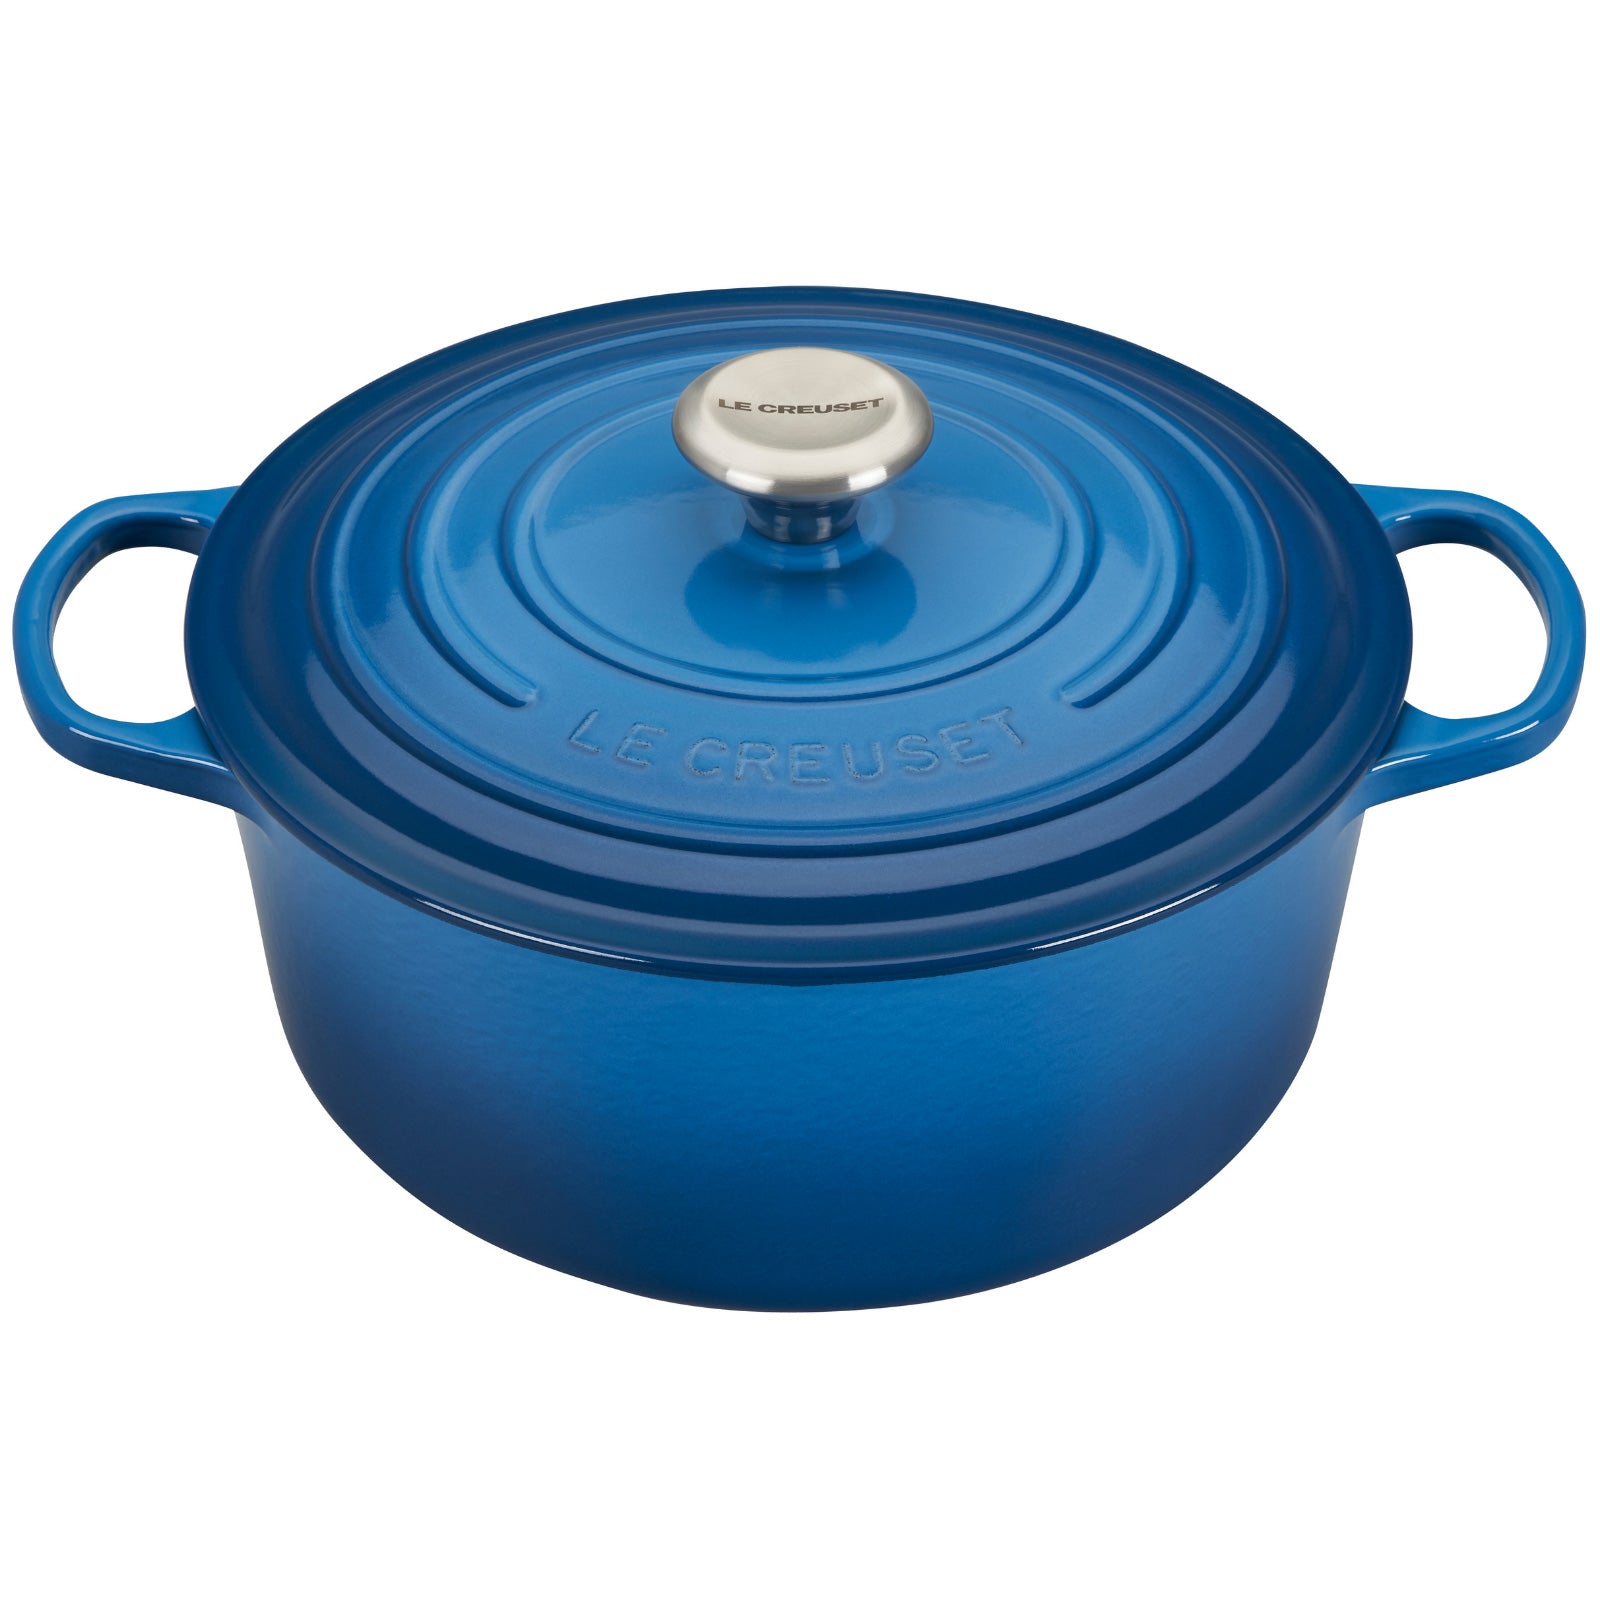 How to Clean Le Creuset Dutch Ovens and Other Enameled Cast Iron